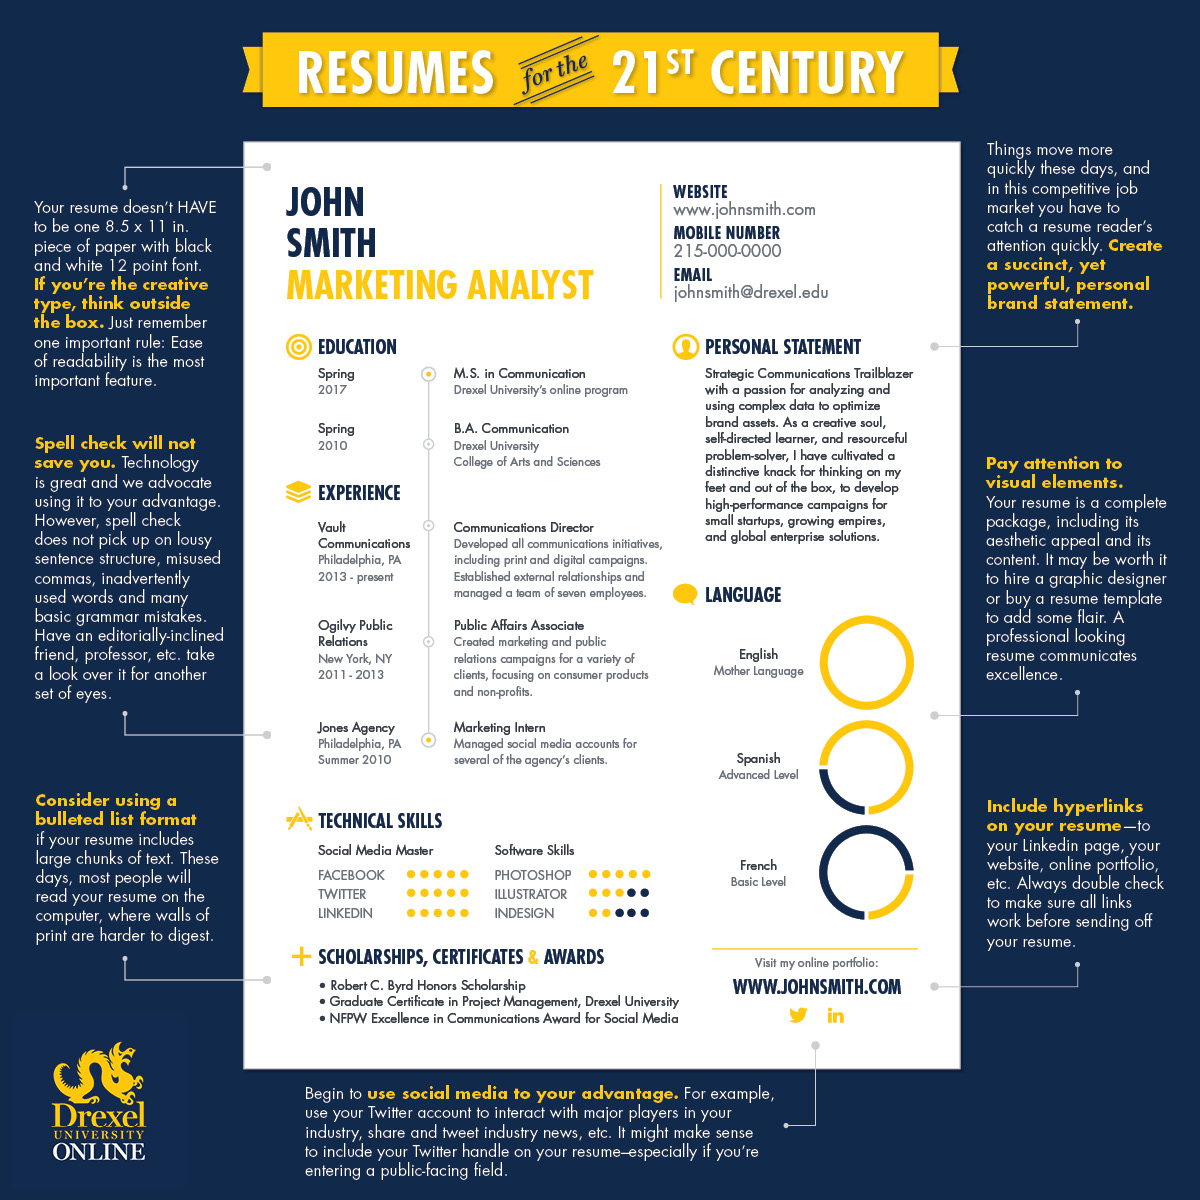 Resumes of 21st Century Infographic Updated(1)